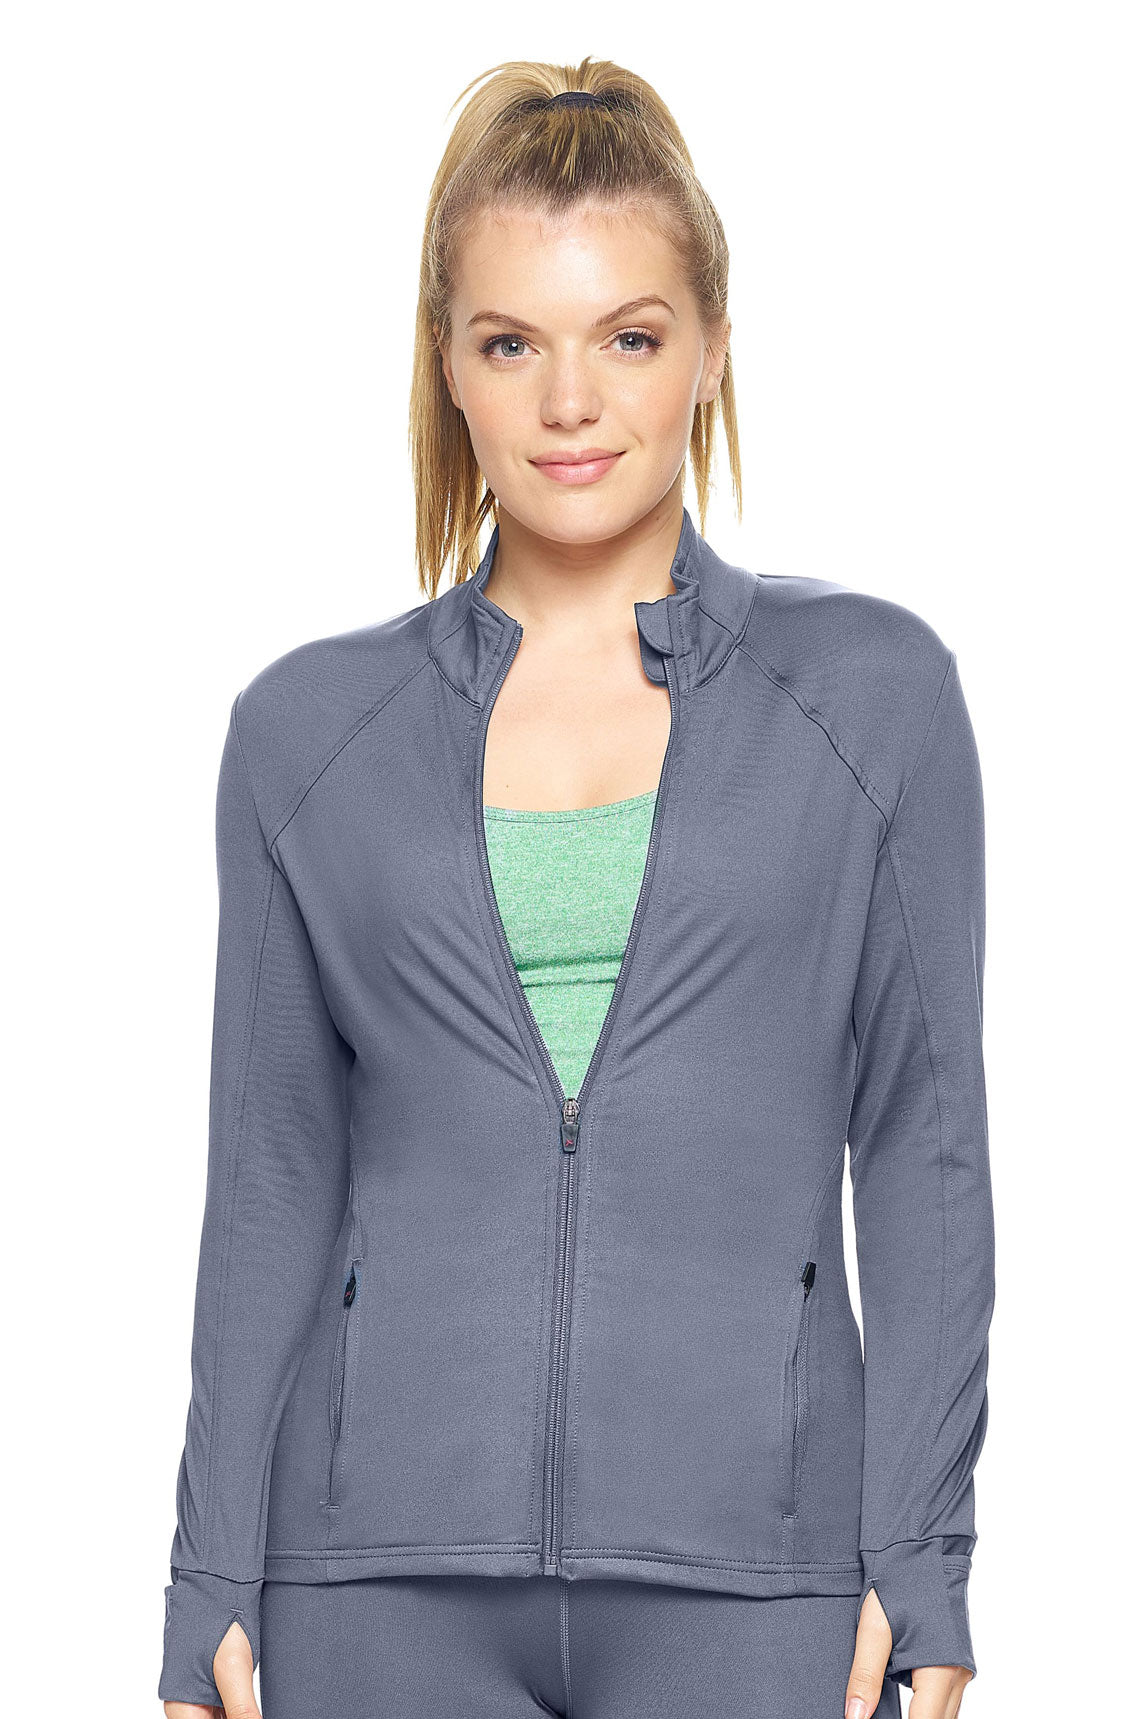 90 Degree By Reflex Check Athletic Hoodies for Women